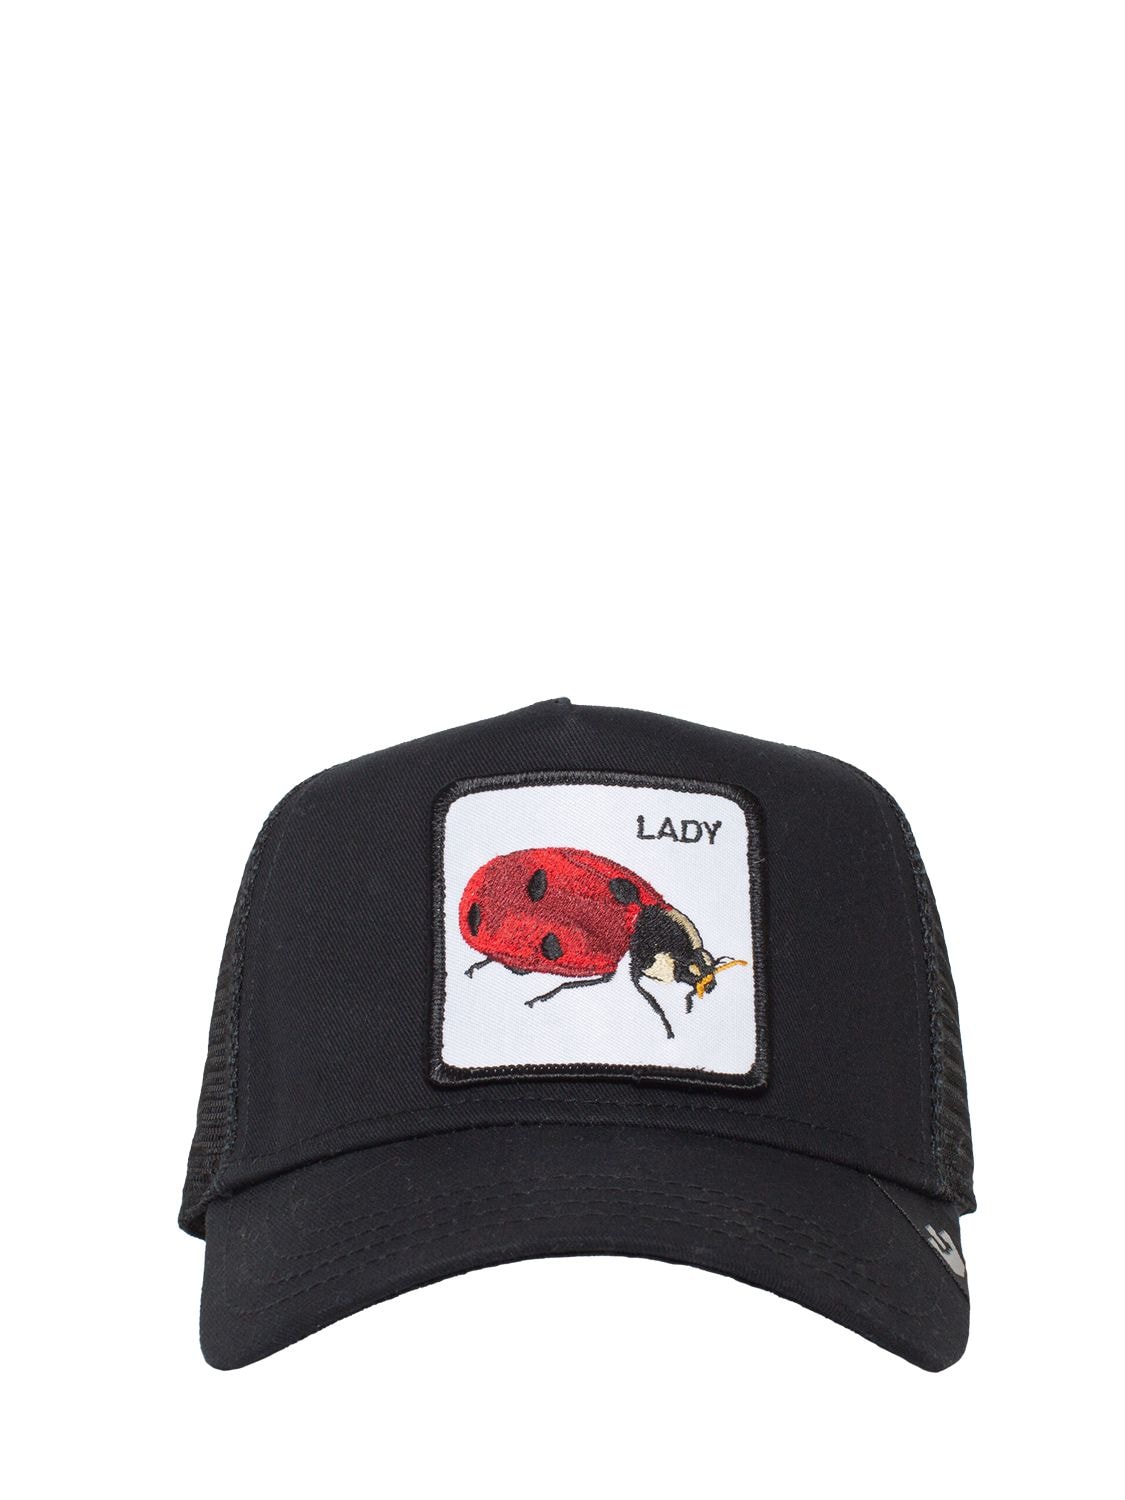 Image of The Lady Bug Trucker Hat W/patch